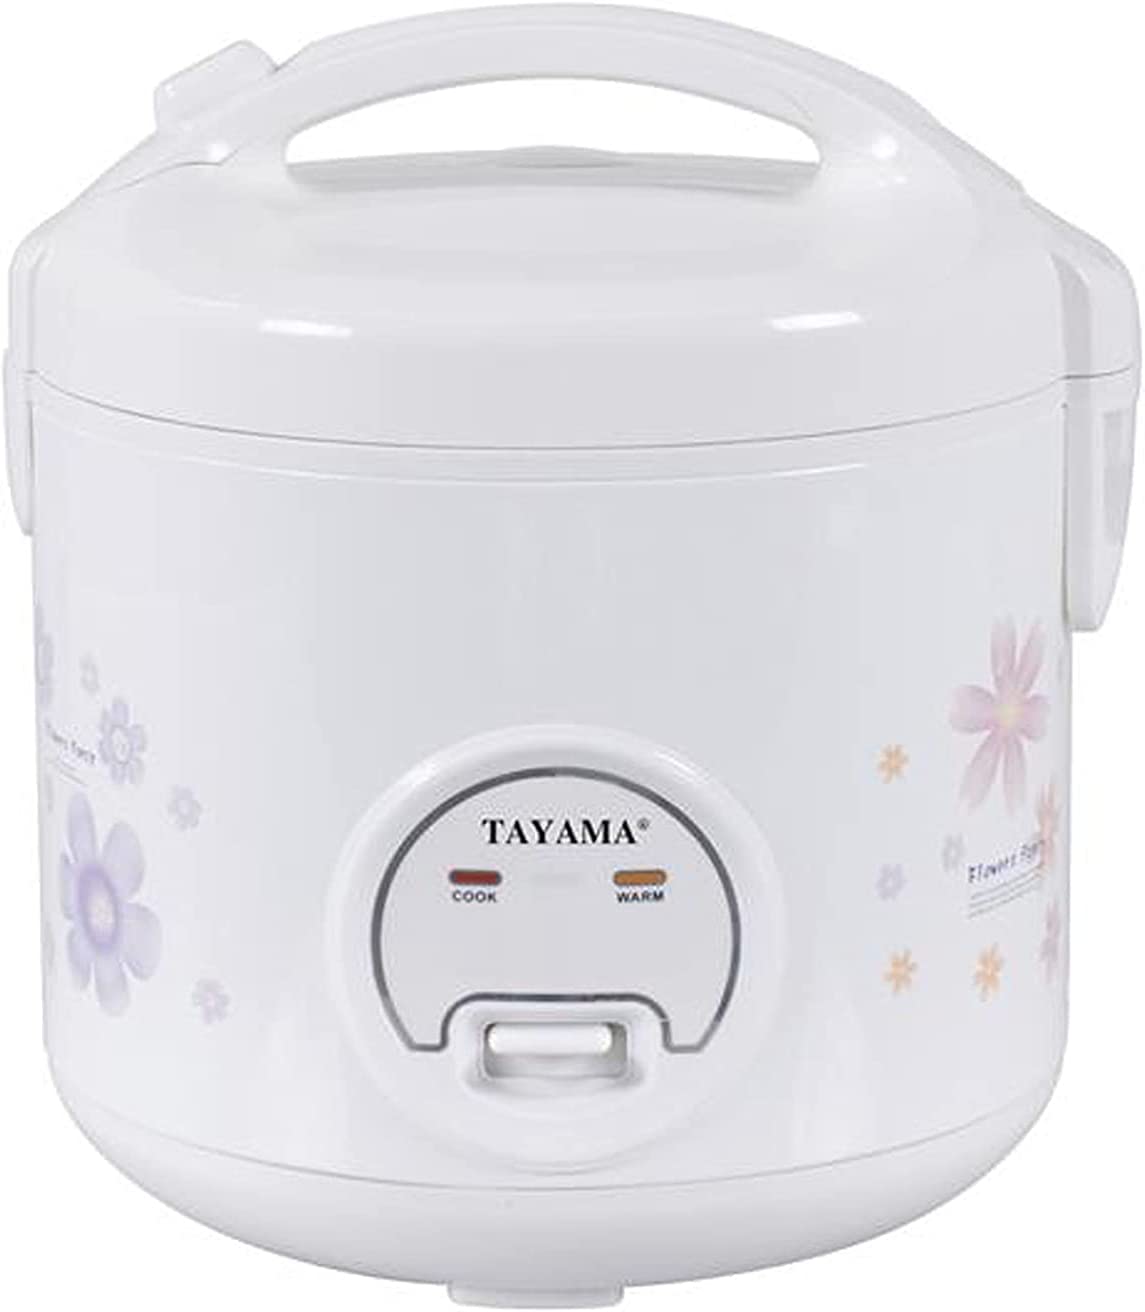 Tayama Automatic Rice Cooker &amp; Food Steamer, 5 Cup